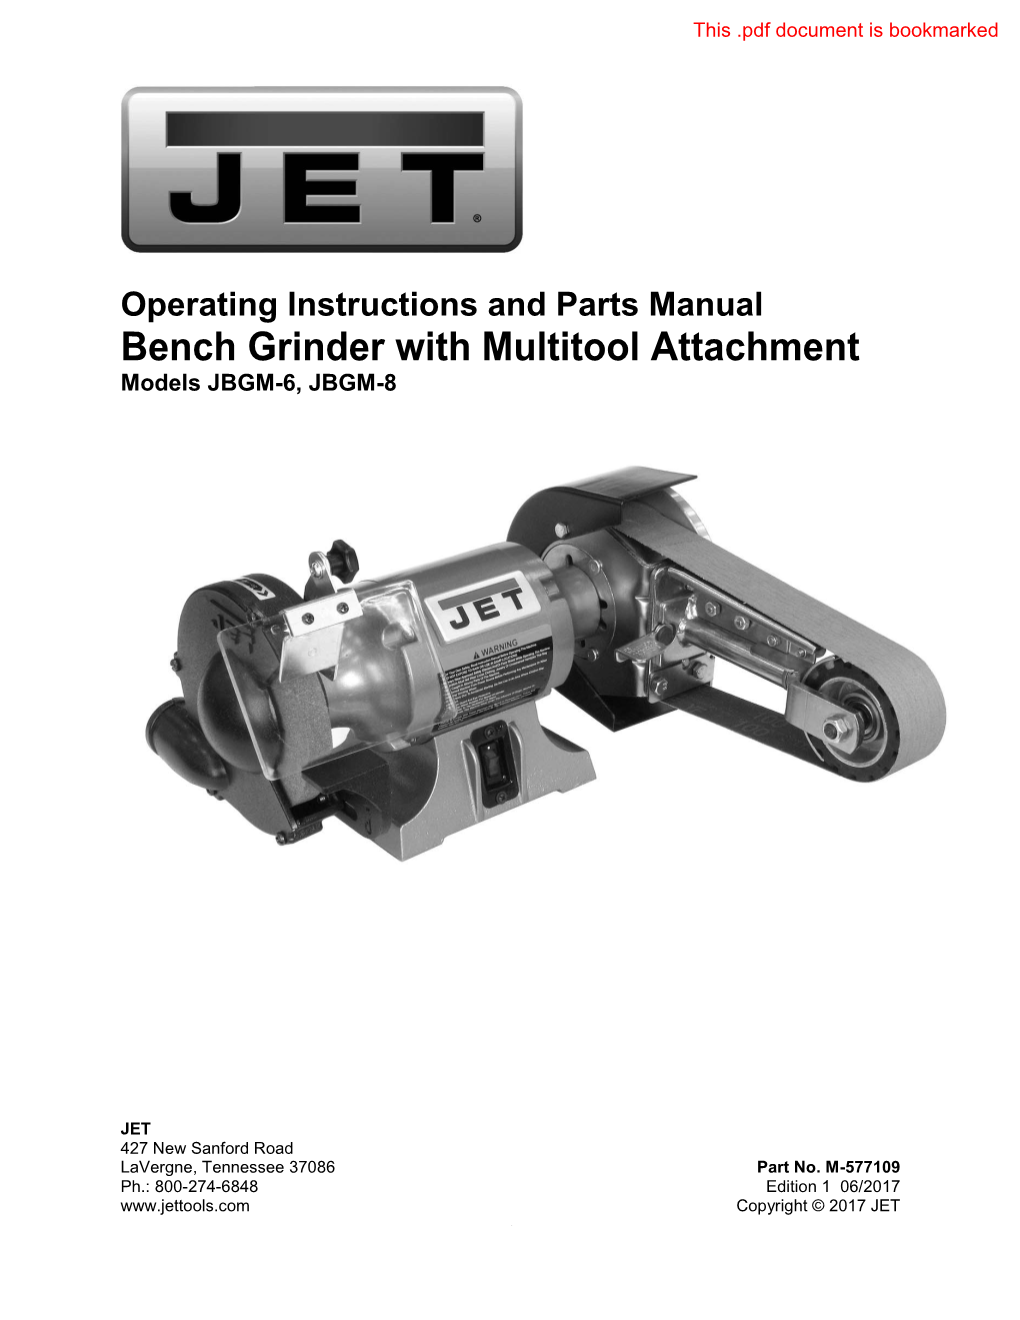 Operating Instructions and Parts Manual Bench Grinder with Multitool Attachment Models JBGM-6, JBGM-8